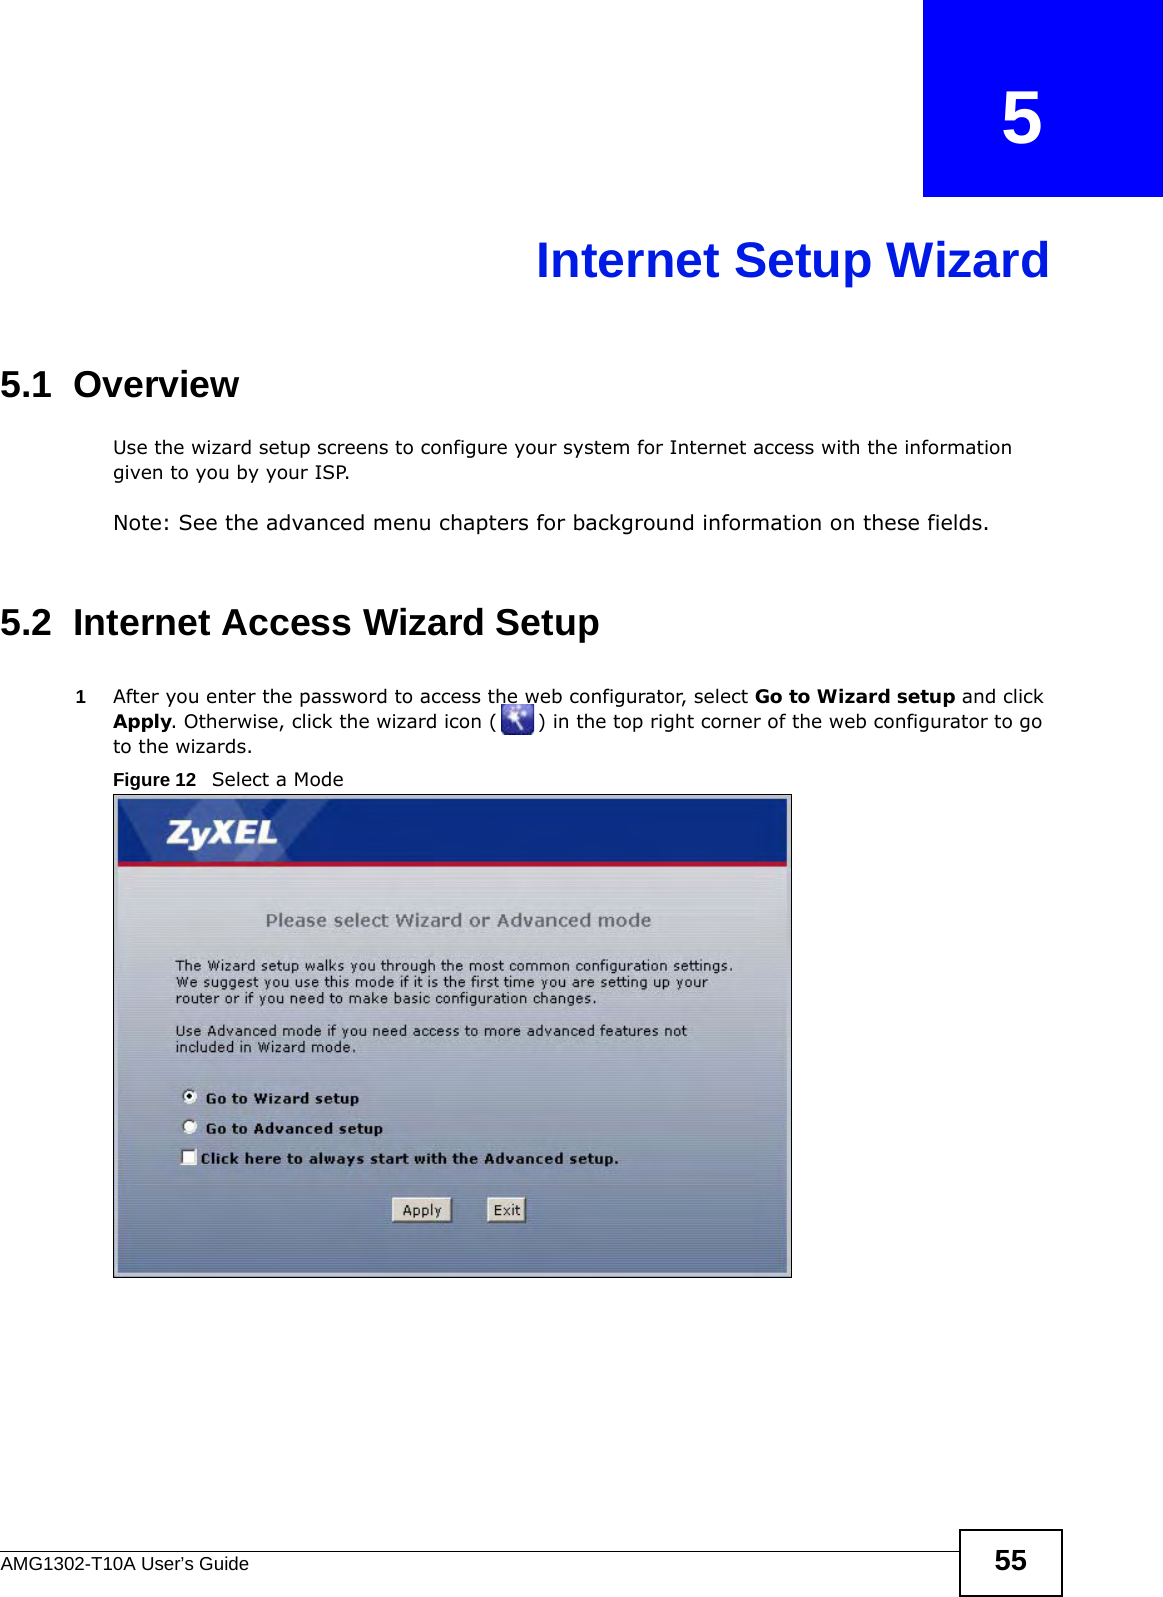 AMG1302-T10A User’s Guide 55CHAPTER   5Internet Setup Wizard5.1  OverviewUse the wizard setup screens to configure your system for Internet access with the information given to you by your ISP. Note: See the advanced menu chapters for background information on these fields.5.2  Internet Access Wizard Setup1After you enter the password to access the web configurator, select Go to Wizard setup and click Apply. Otherwise, click the wizard icon ( ) in the top right corner of the web configurator to go to the wizards. Figure 12   Select a Mode